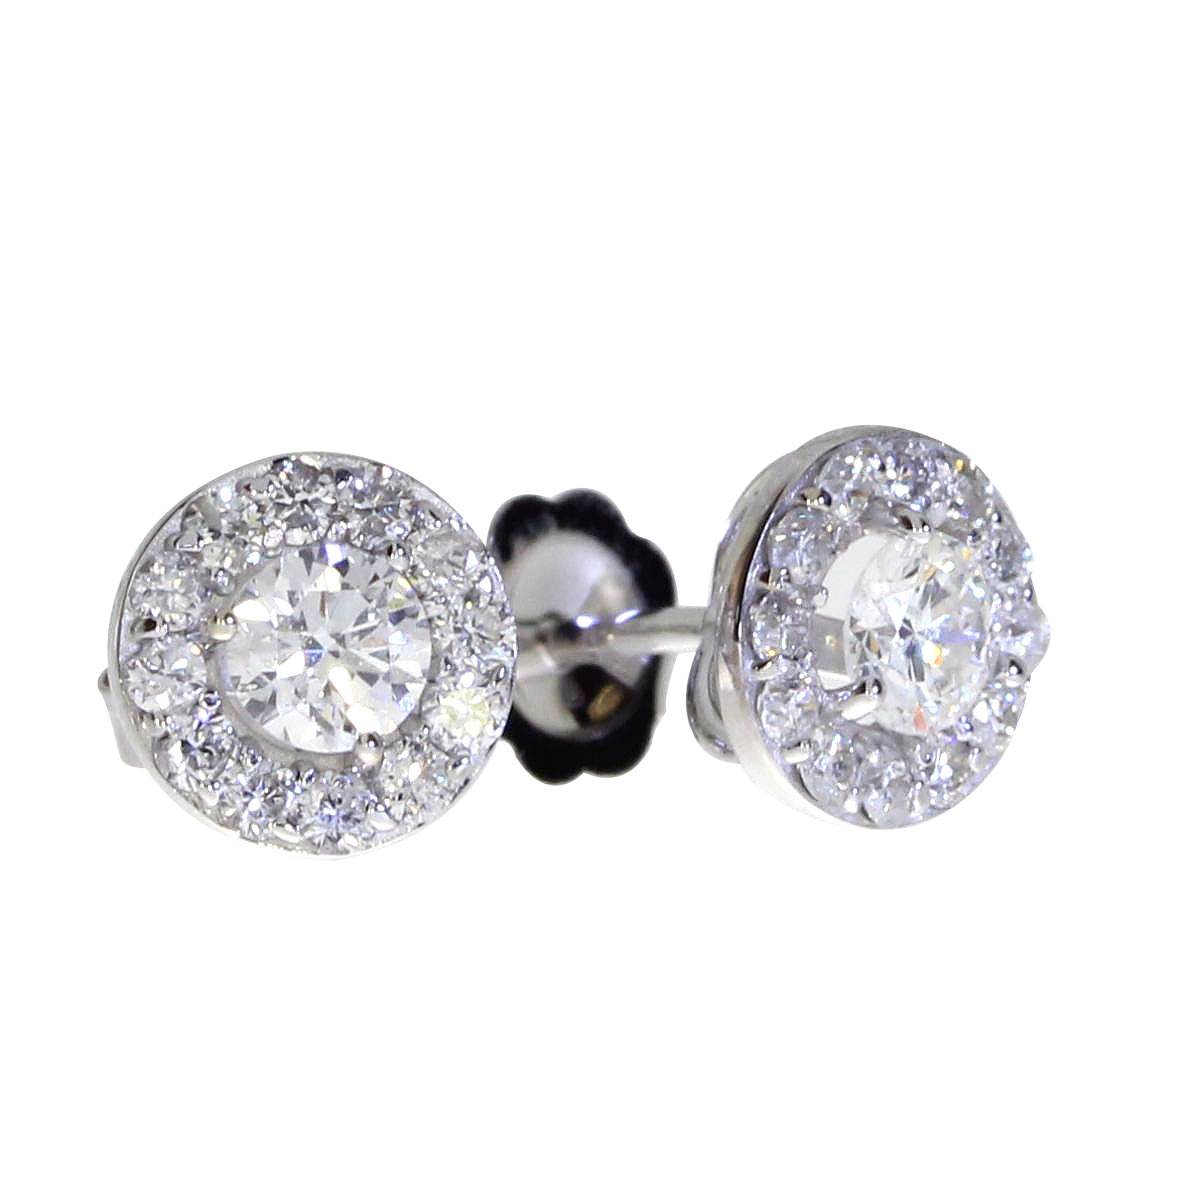 Stunning 14k white gold halo style earrings with .48 total carats of shimmering diamonds.